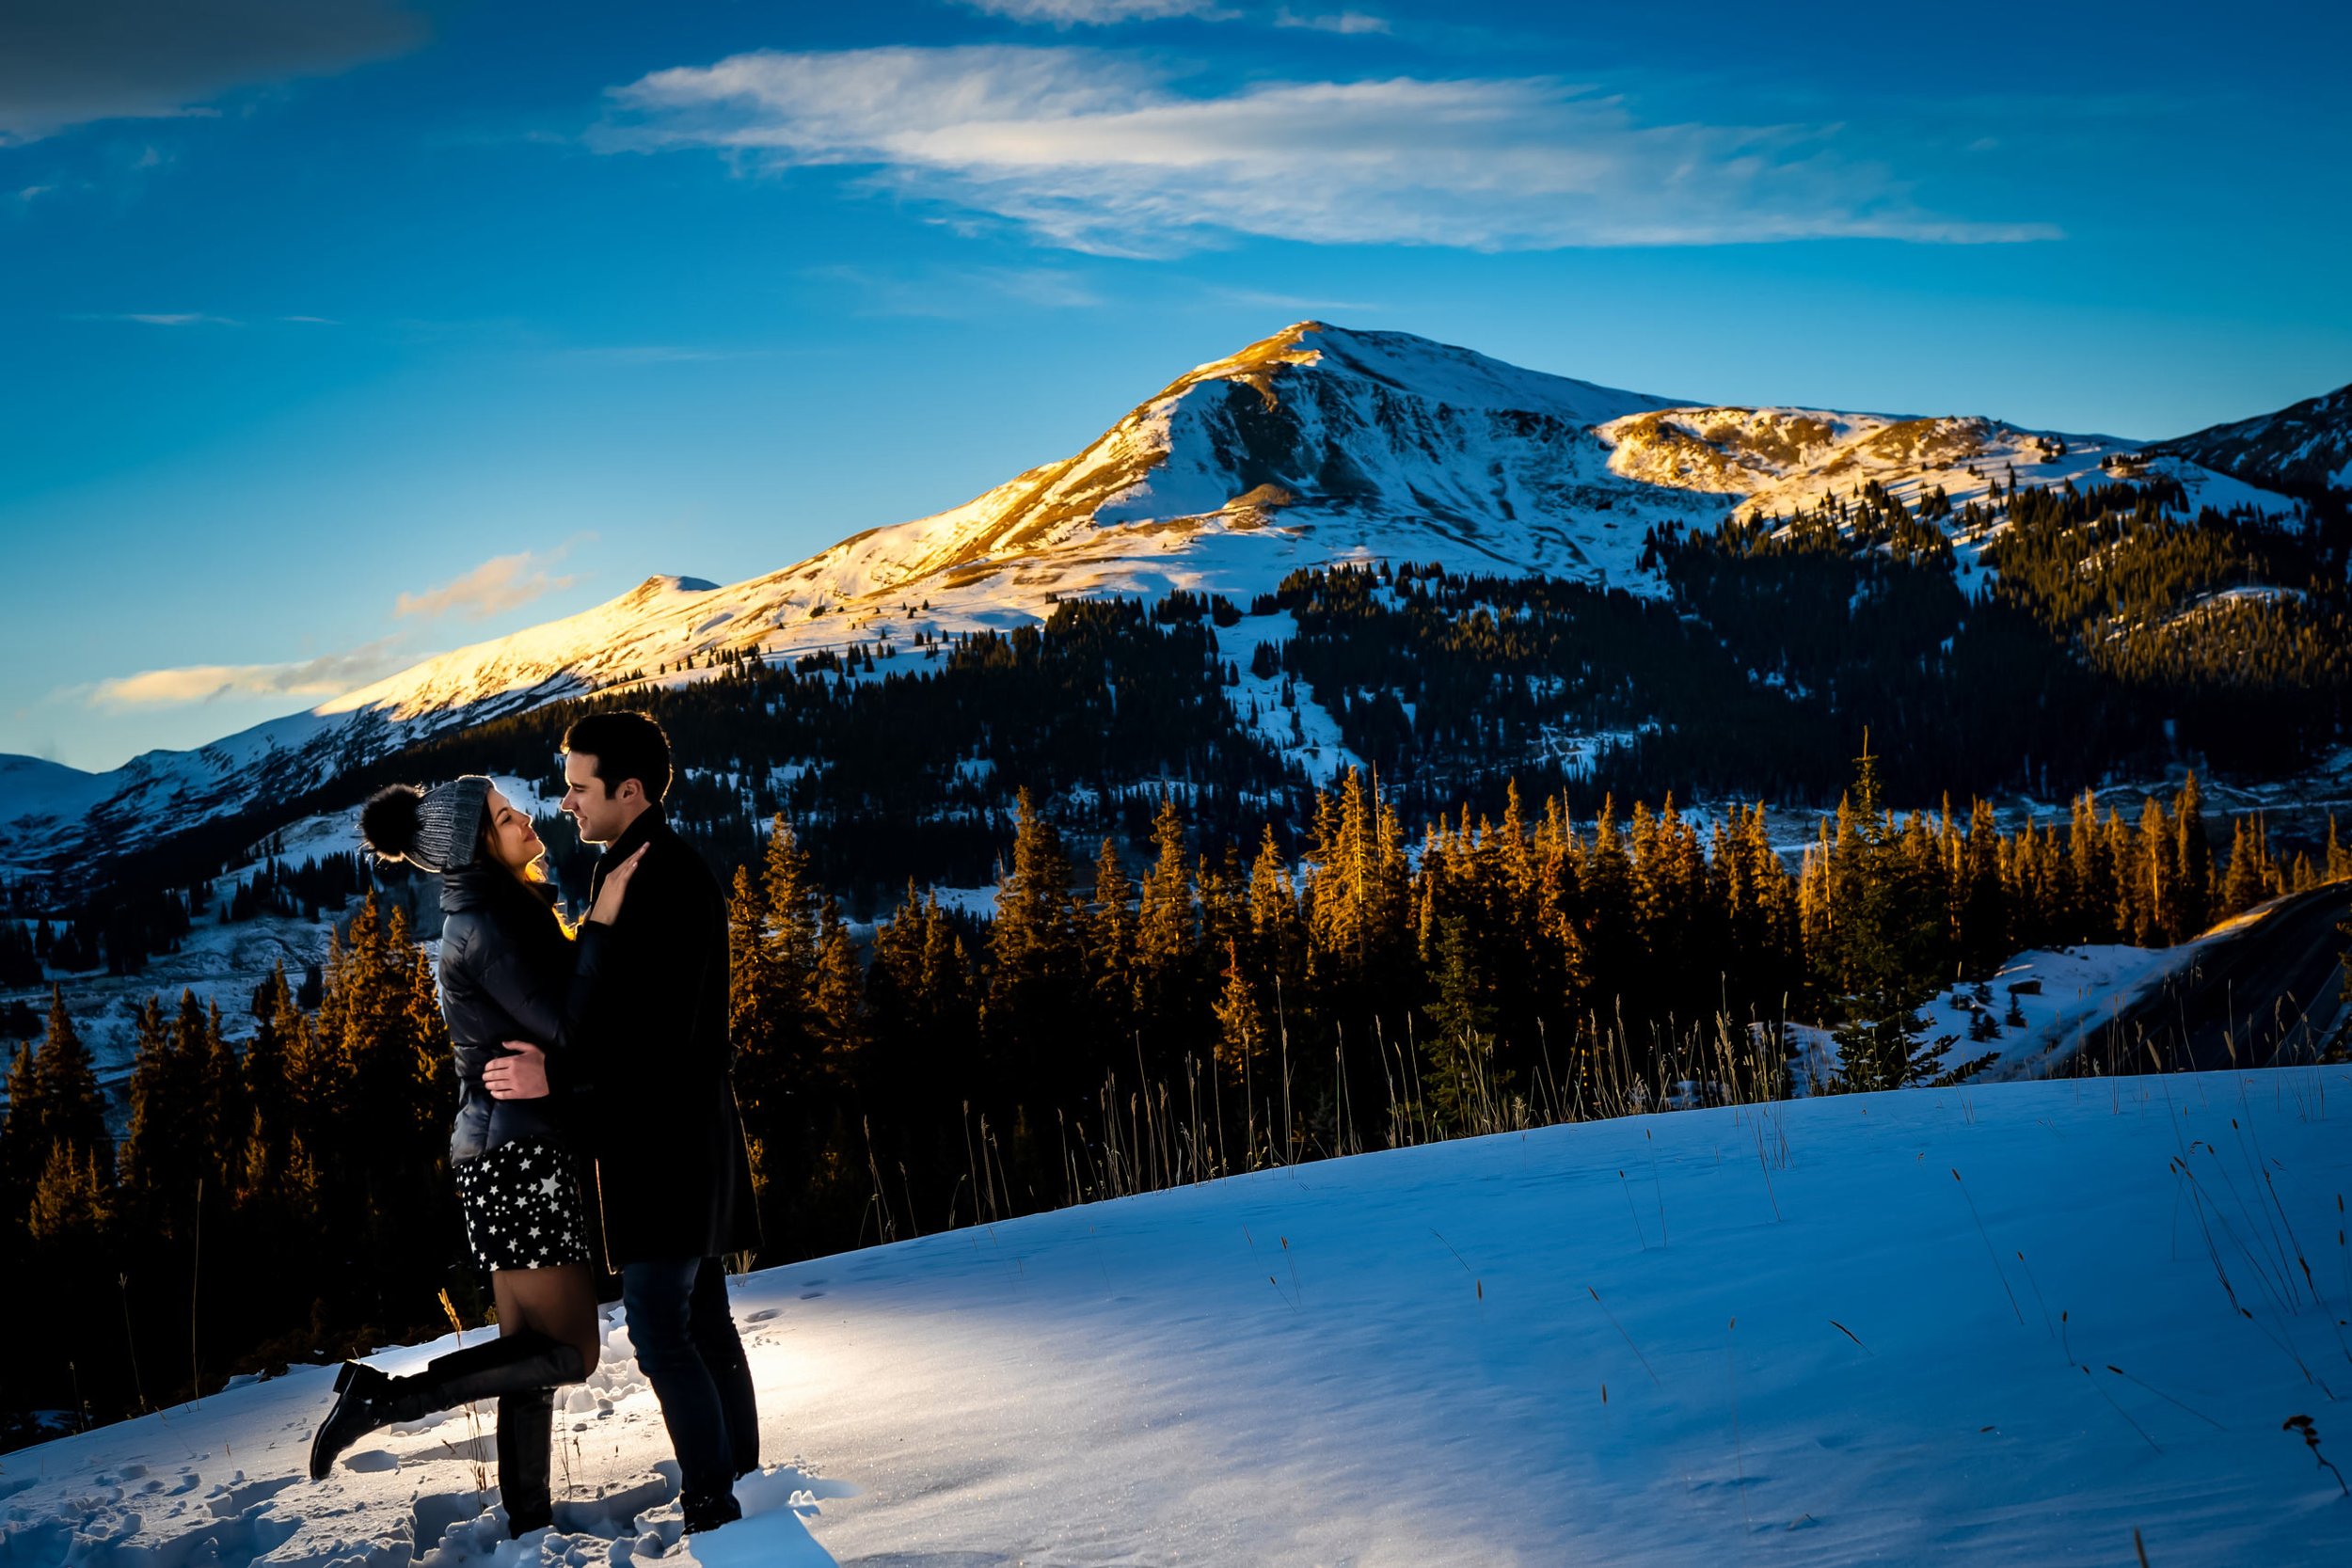 Newly engaged couple celebrate their proposal during a portrait with snowcapped mountains in the background, Winter Engagement Session, Winter Engagement Photos, Engagement Photos Inspiration, Engagement Photography, Engagement Photographer, Winter Engagement Photos, Proposal Photos, Proposal Photographer, Proposal Photography, Winter Proposal, Mountain Proposal, Proposal Inspiration, Summit County engagement session, Summit County engagement photos, Summit County engagement photography, Summit County engagement photographer, Summit County engagement inspiration, Colorado engagement session, Colorado engagement photos, Colorado engagement photography, Colorado engagement photographer, Colorado engagement inspiration, Clinton Gulch Engagement